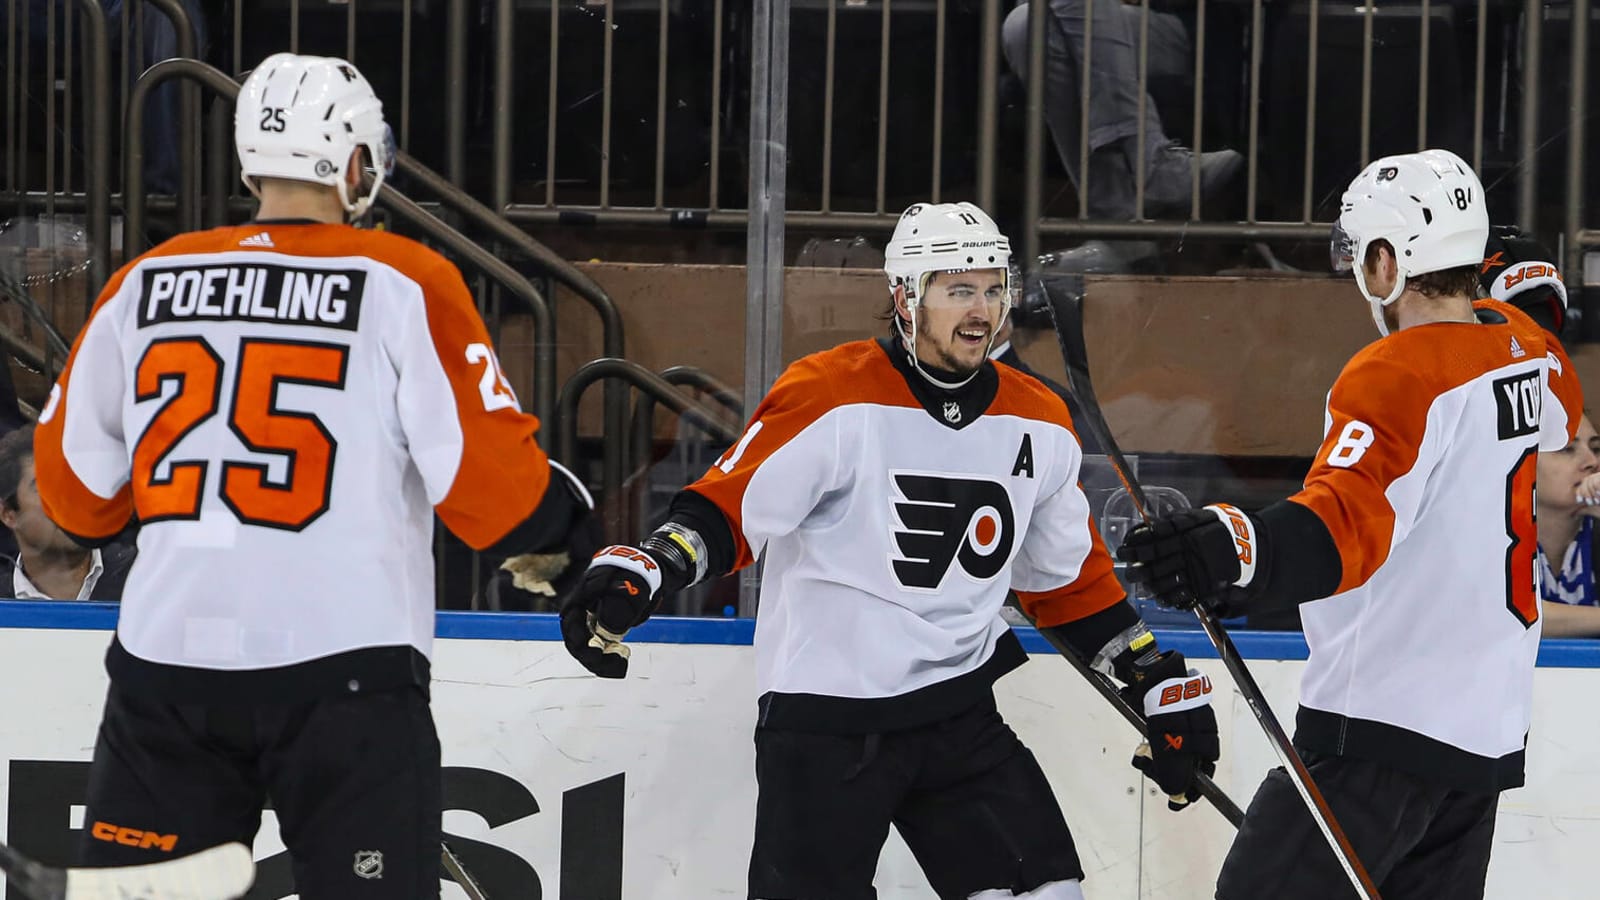 Flyers Takeaways: Playoff Hopes Still Alive With Win Against Rangers